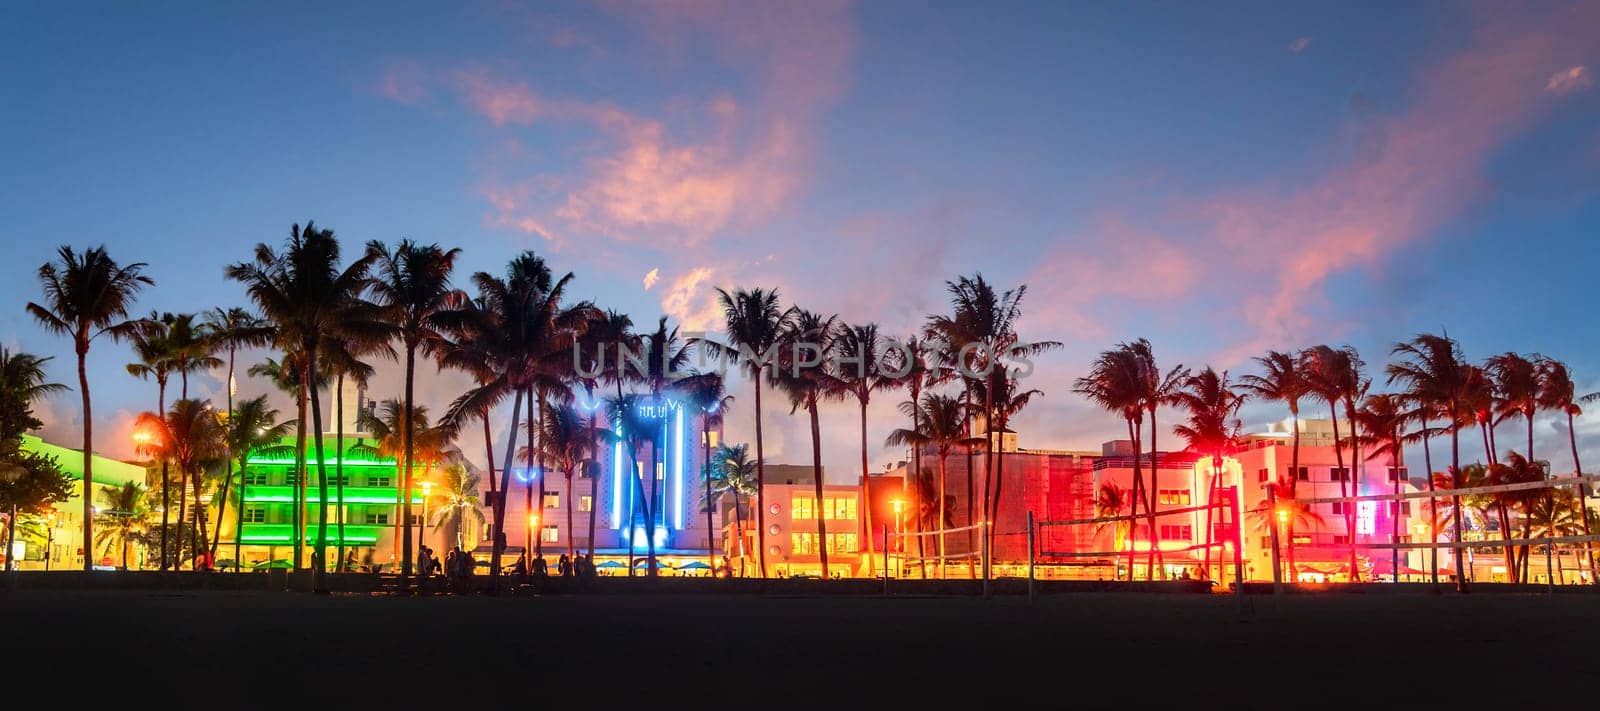 Miami Beach Ocean Drive panorama with hotels and restaurants at sunset. City skyline with palm trees at night by Mariakray